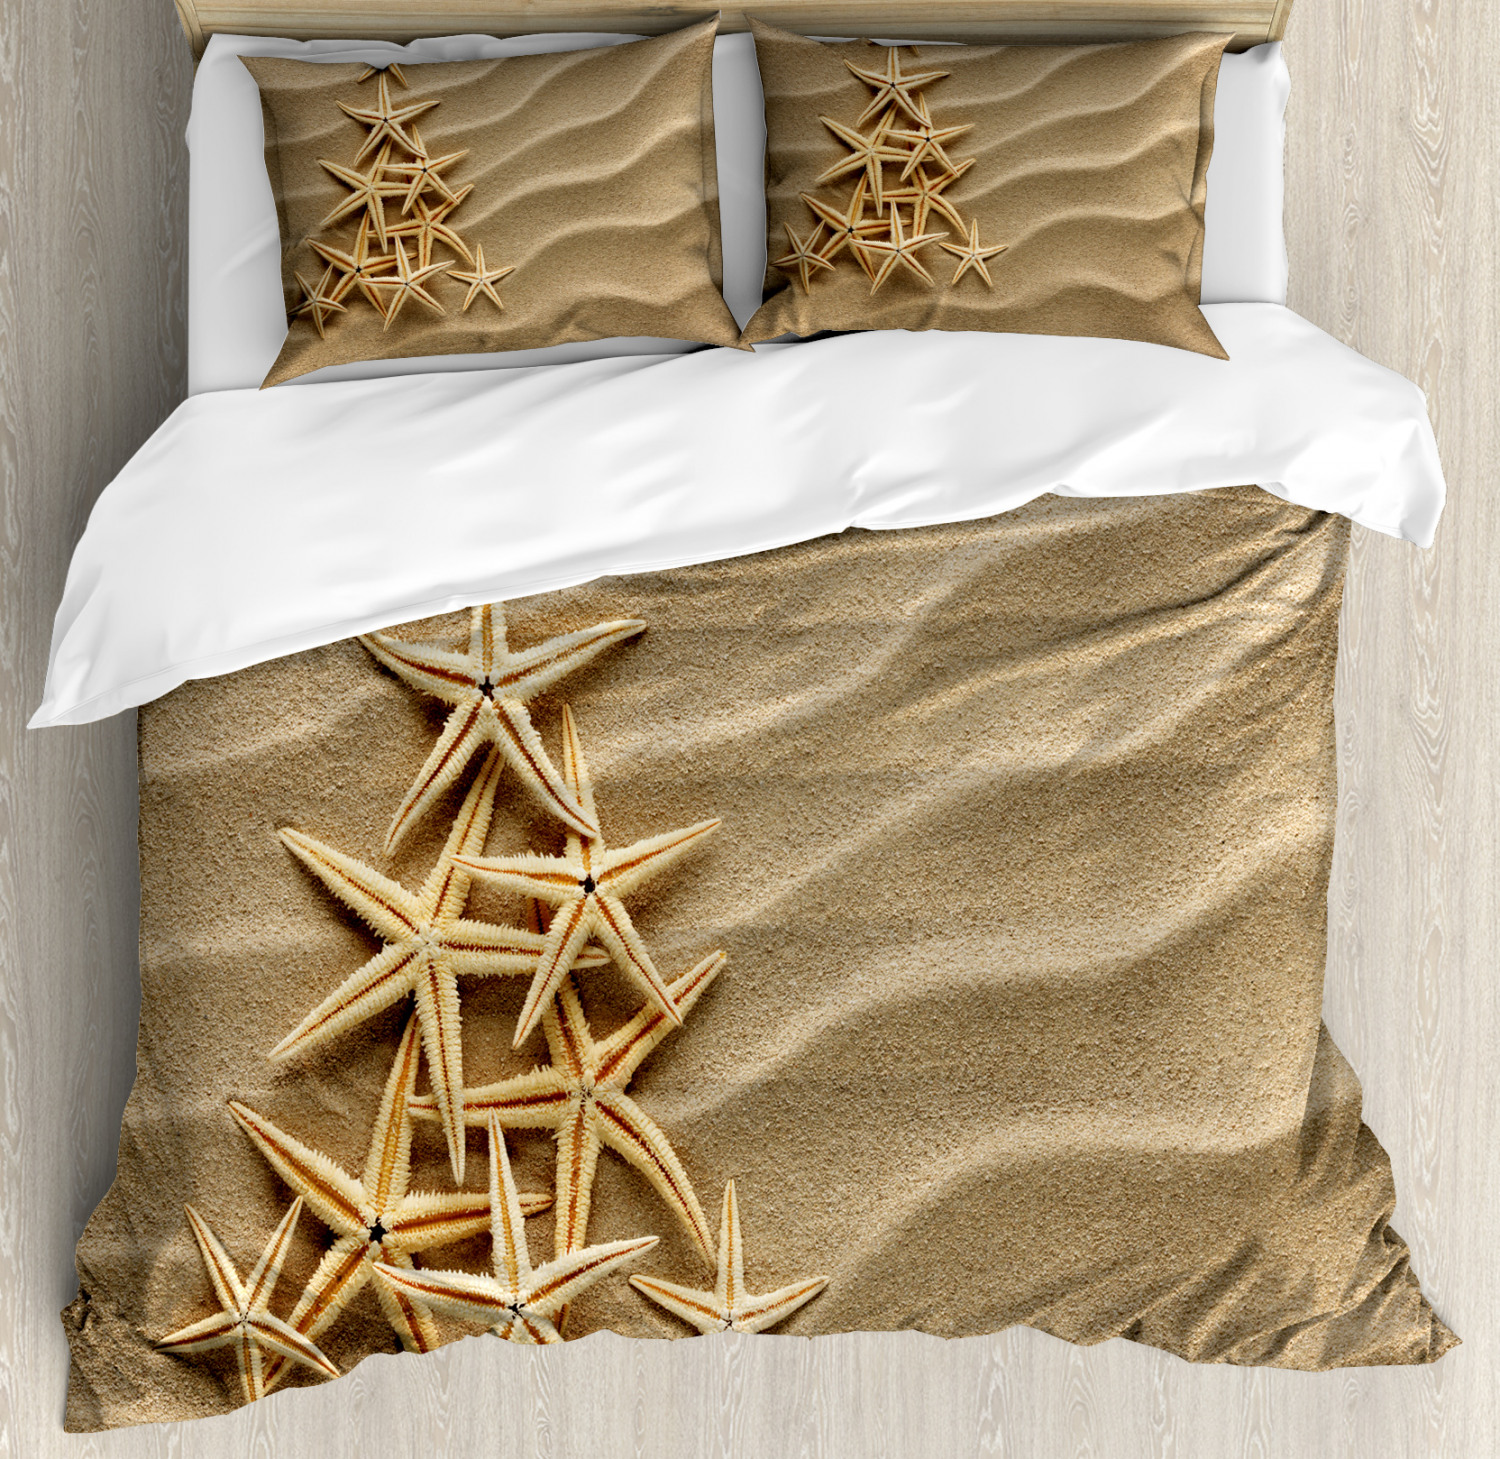 Starfish Duvet Cover Set With Pillow Shams Tree From Shells Print